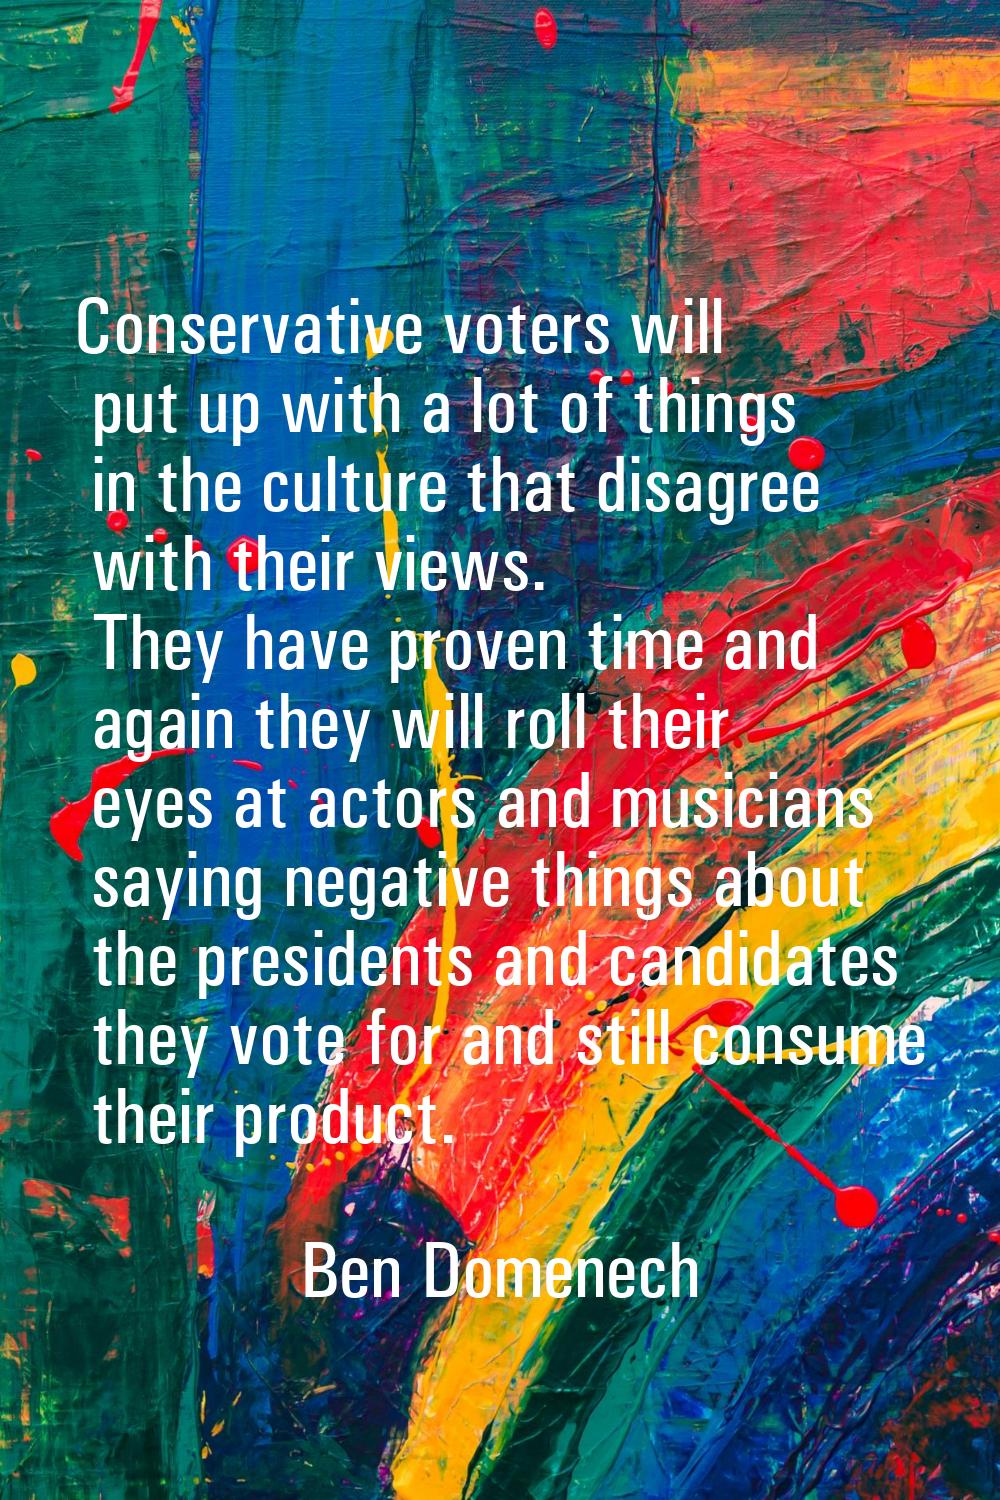 Conservative voters will put up with a lot of things in the culture that disagree with their views.